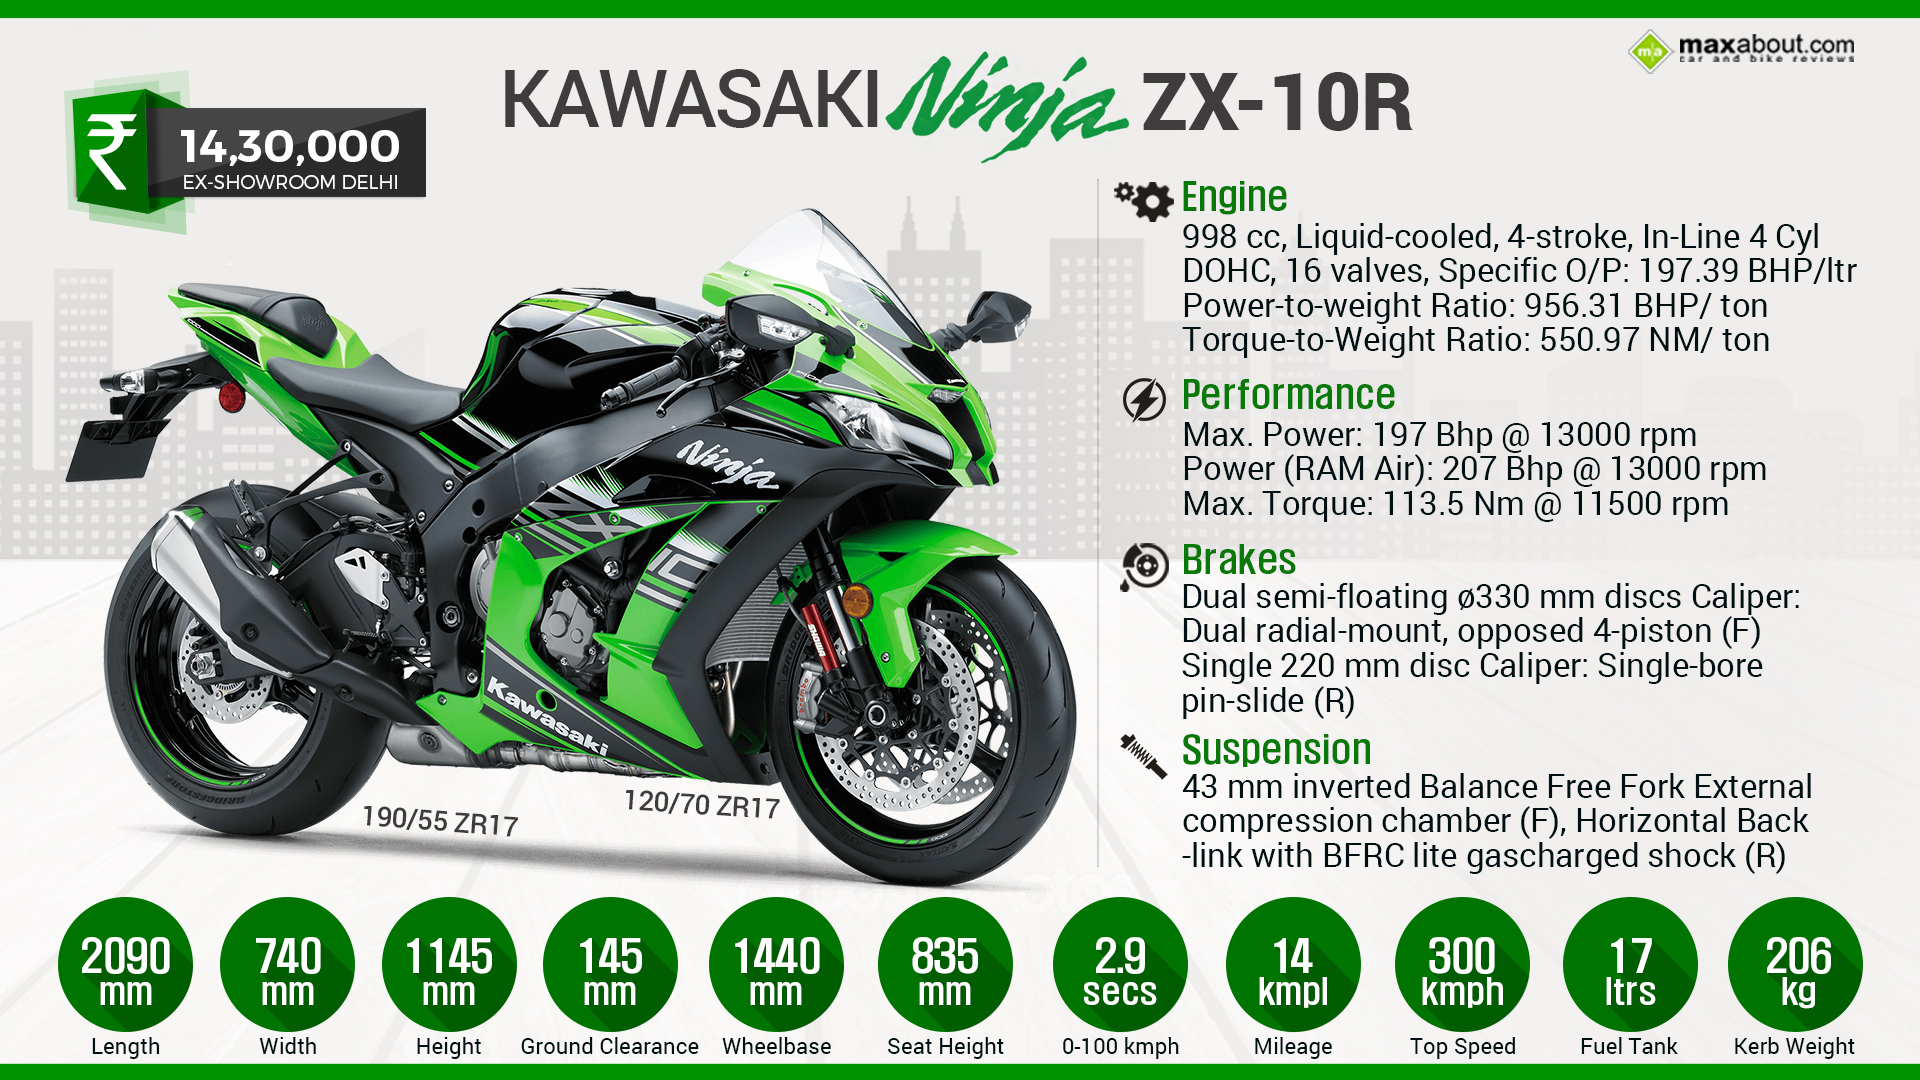 er mere end fængelsflugt nyhed All You Need to Know About Kawasaki Ninja ZX-10R